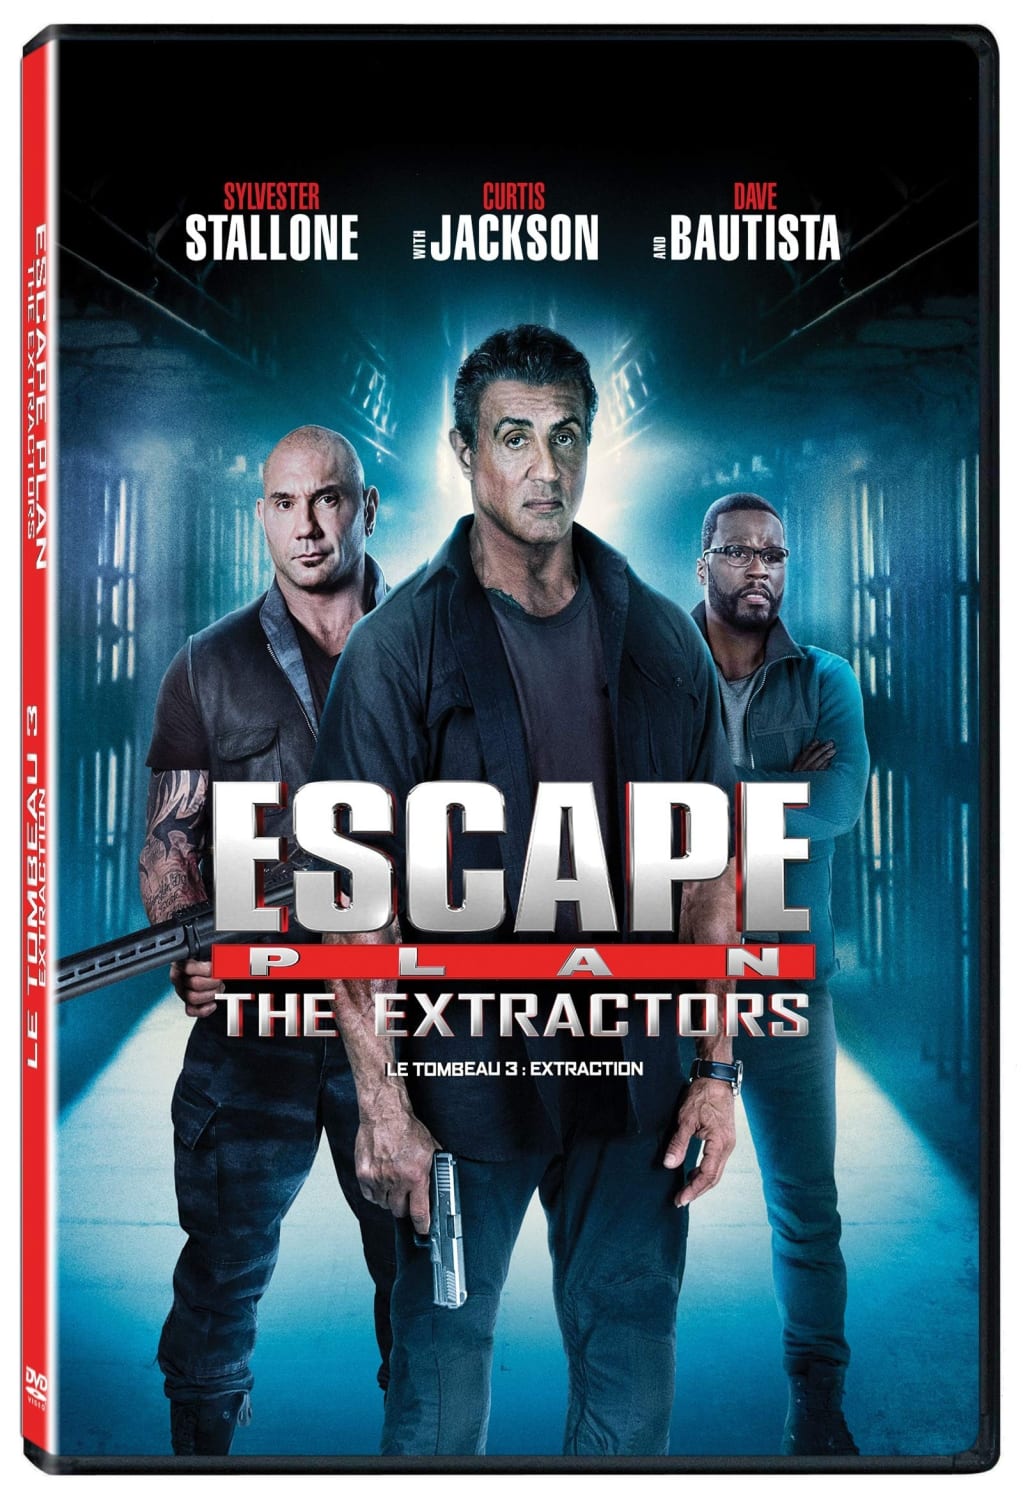 Escape Plan 3: The Extractors (DVD) on MovieShack